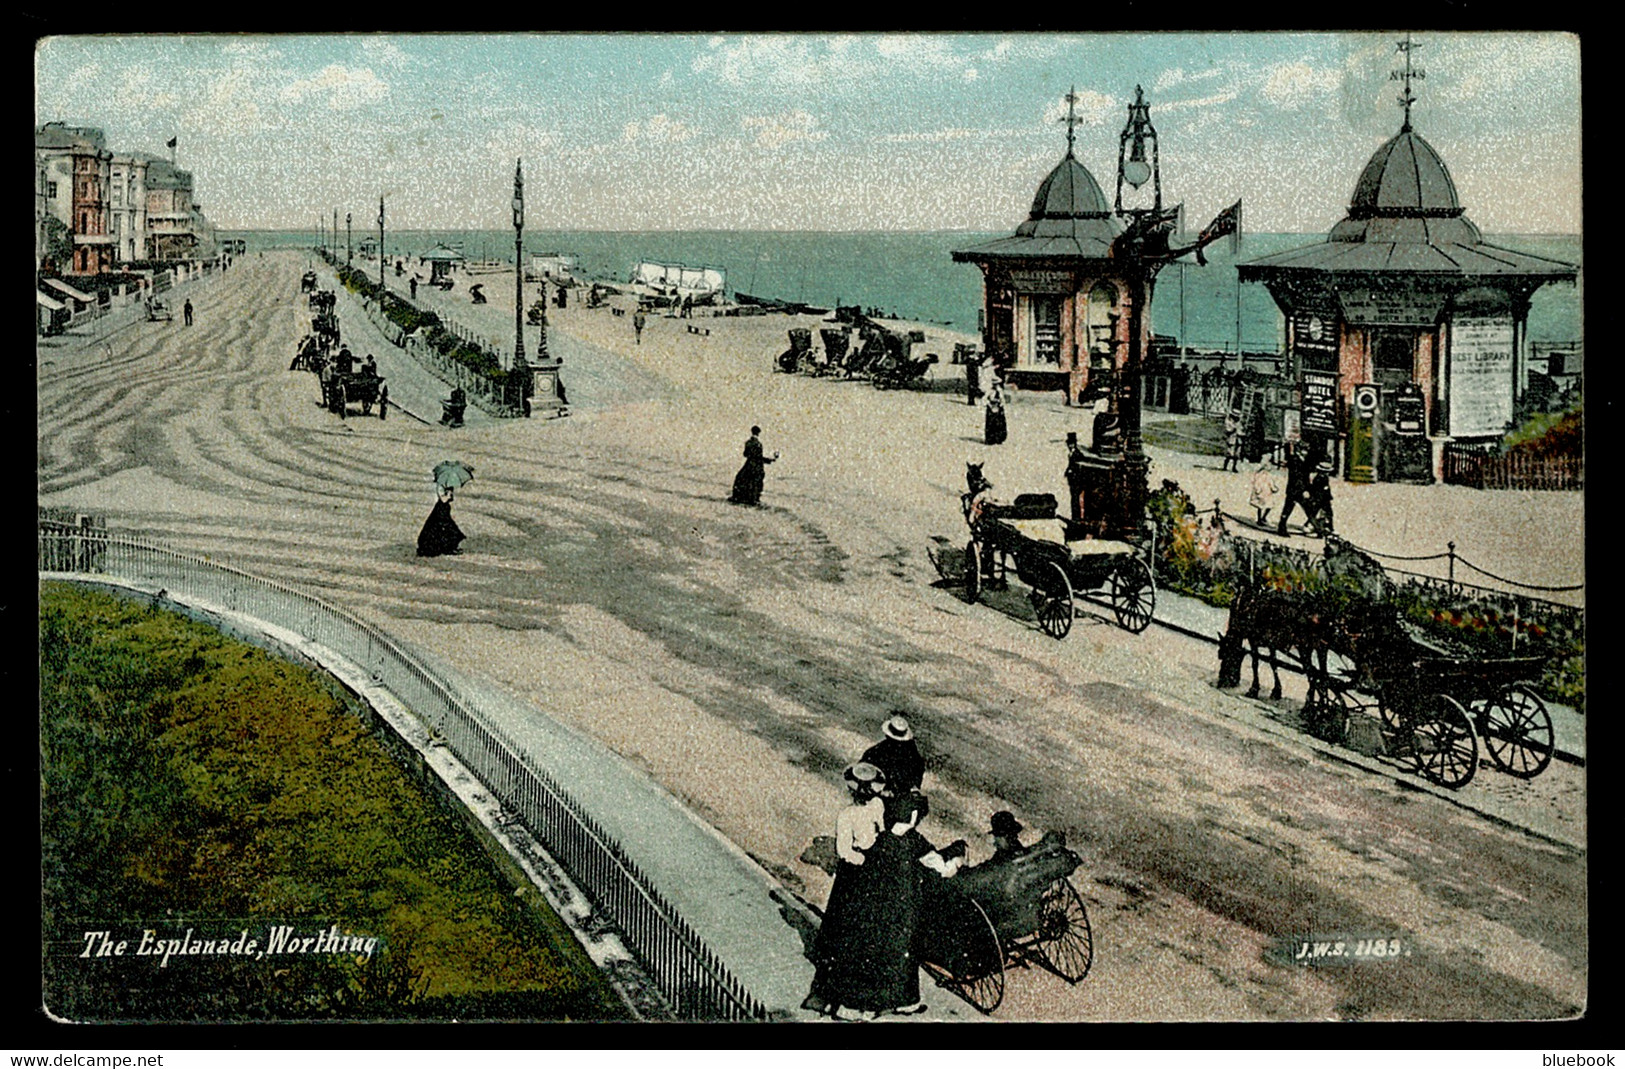 Ref 1589 - Early Postcard - The Esplanade Worthing Sussex - Pier Entrance With Wheelchair & Horse Drawn Carriagess - Worthing